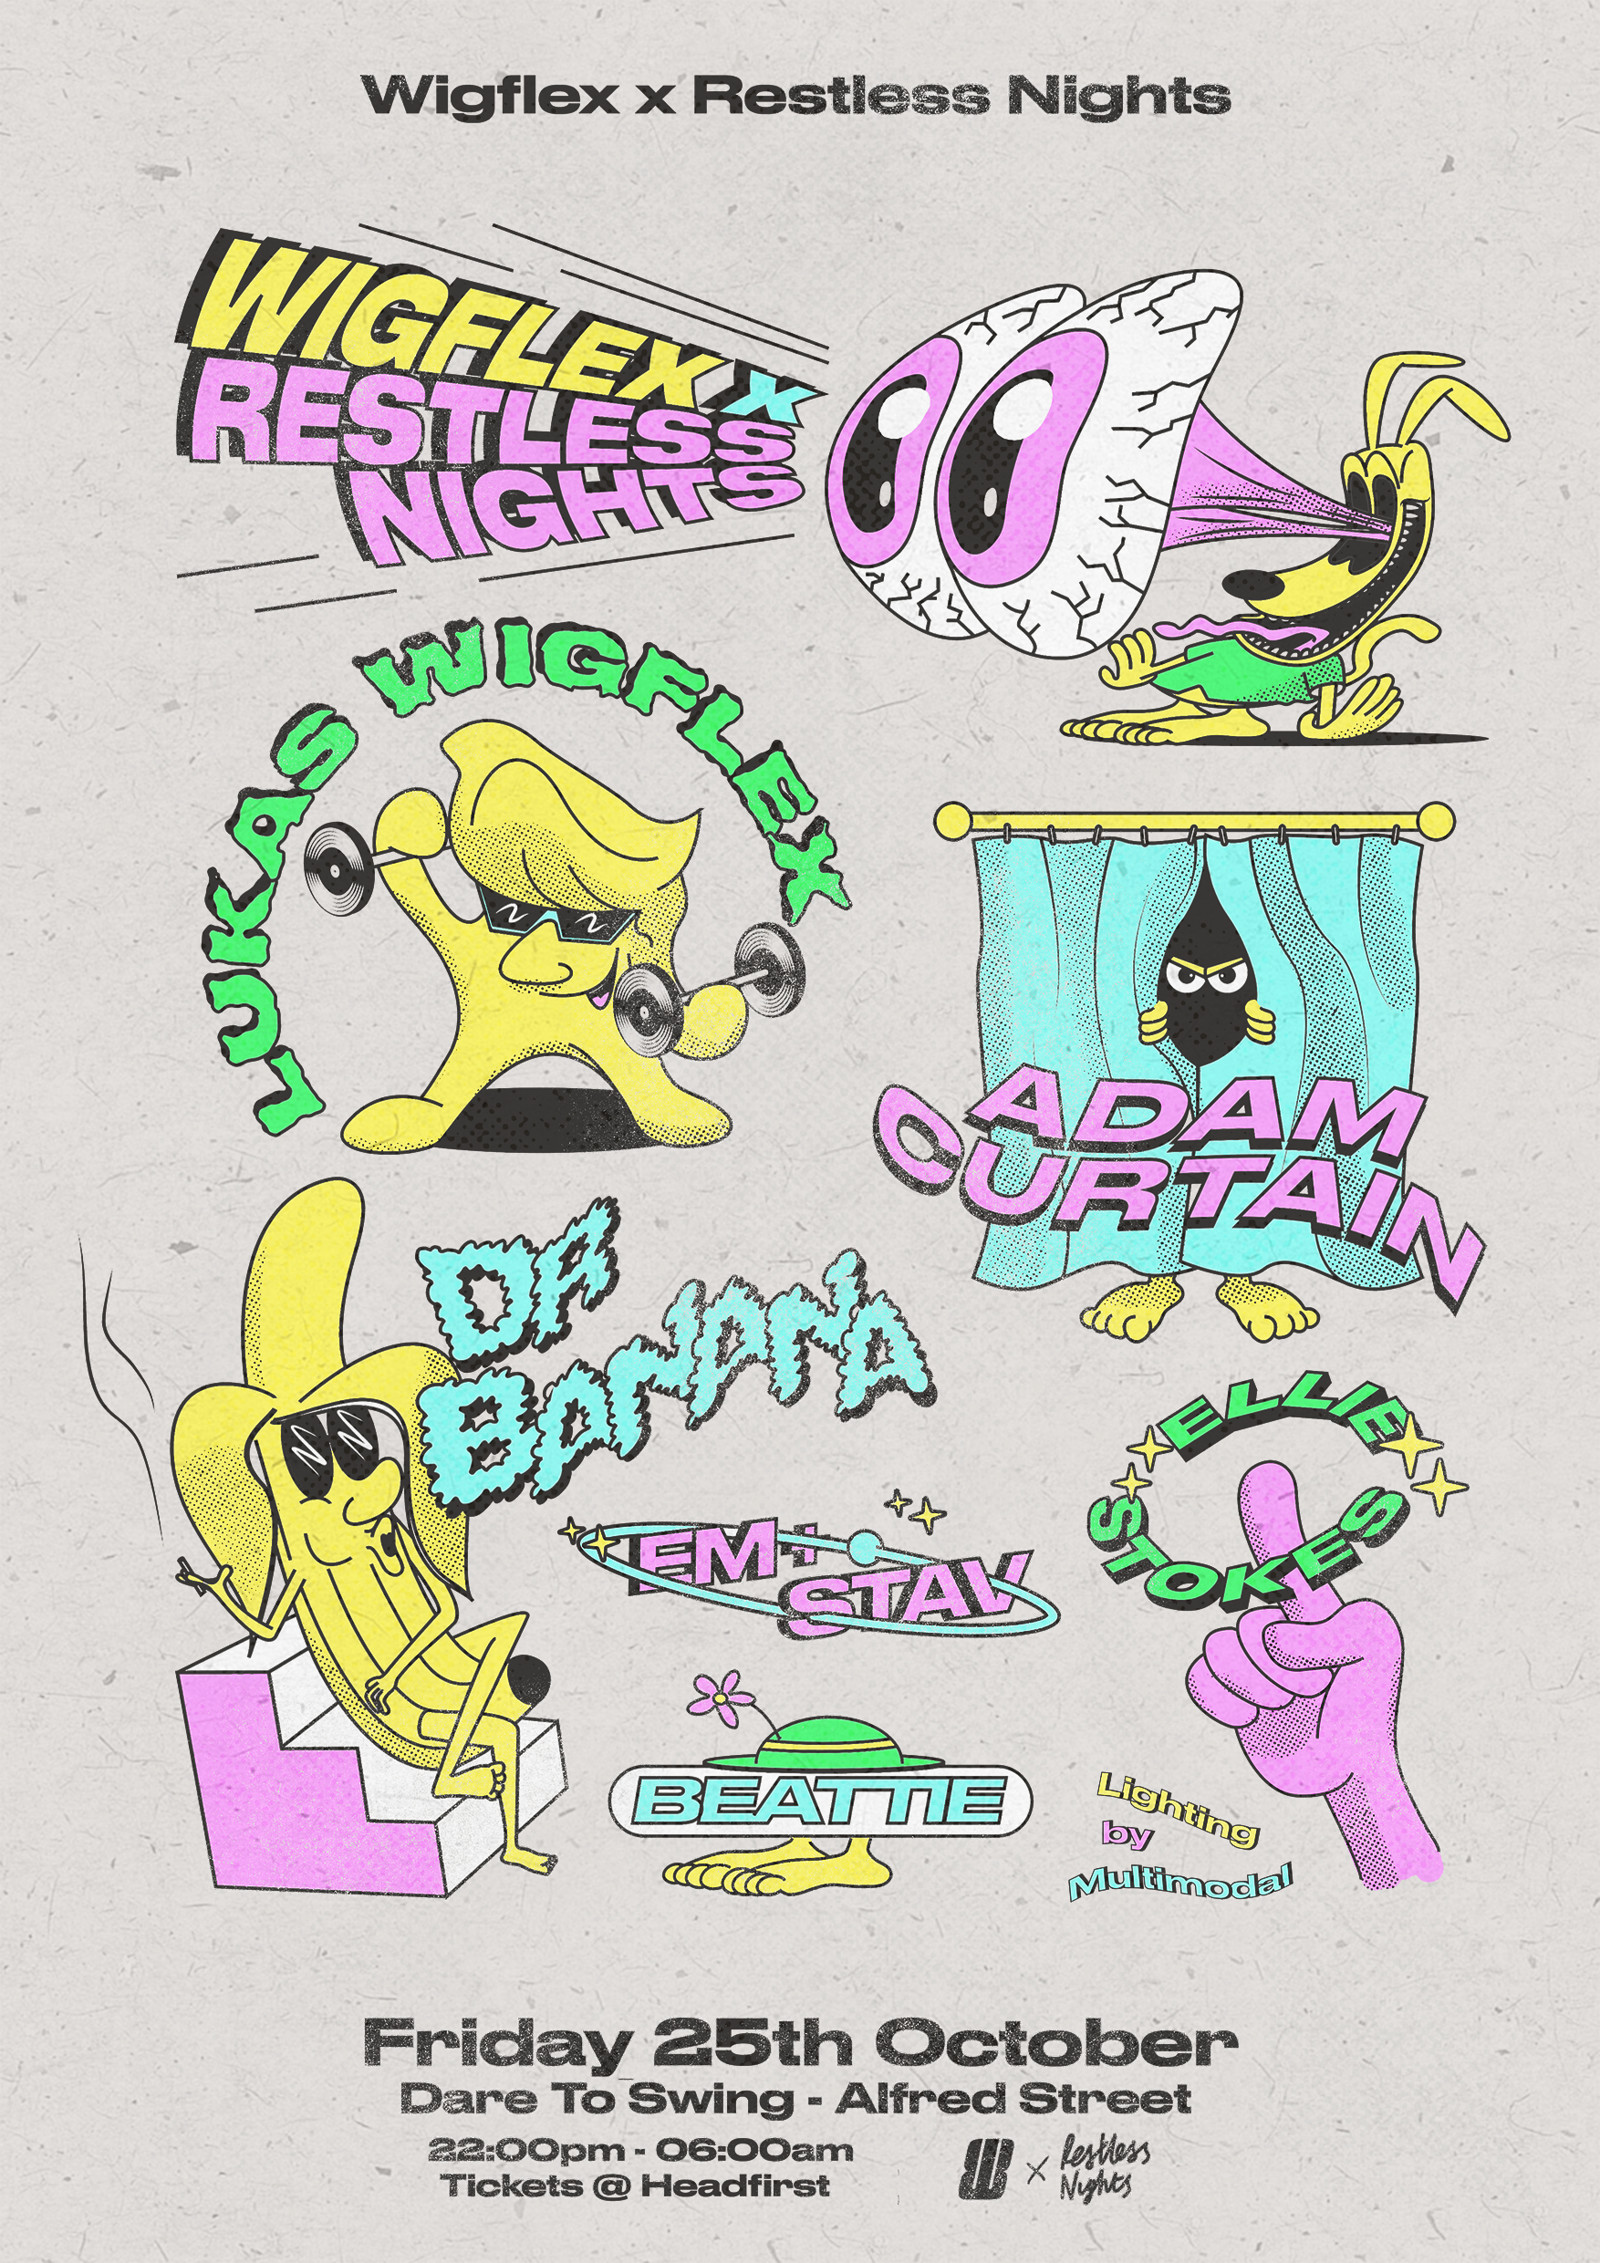 Wigflex x Restless Nights Take Over at Dare to Club